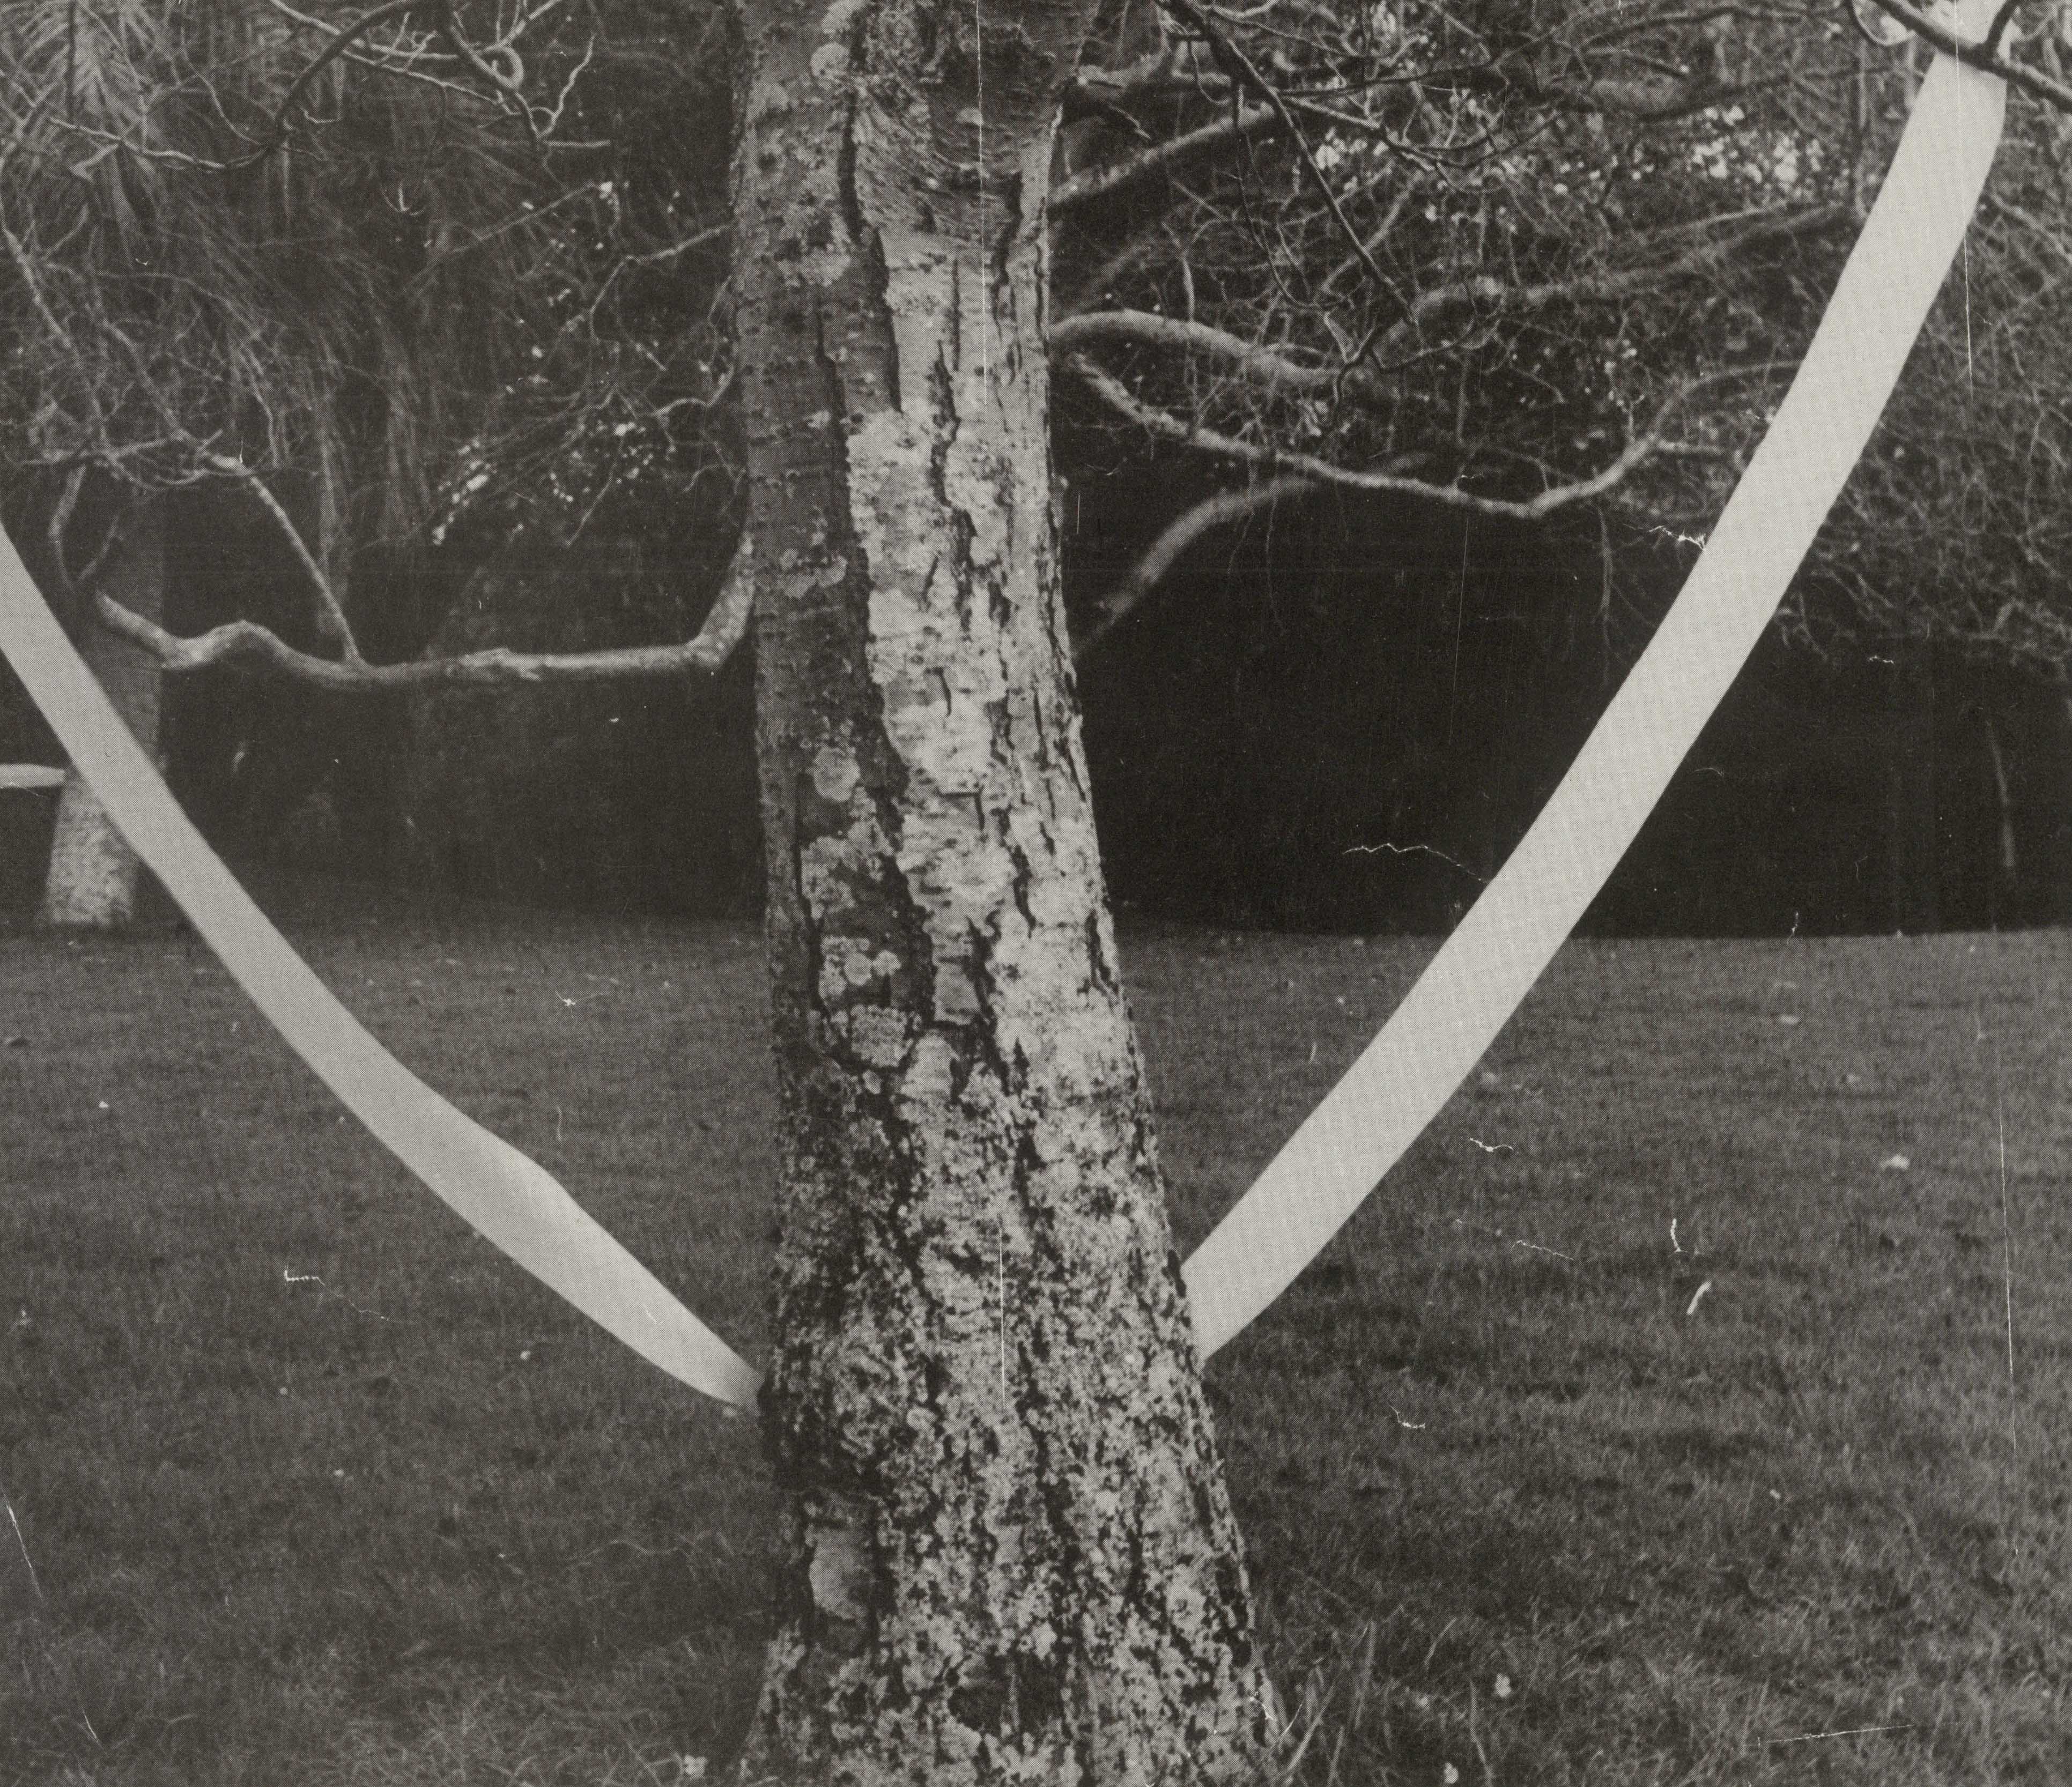 Black and white photograph of a white shape tied hanging behind a tree, as if to form artificial branches.